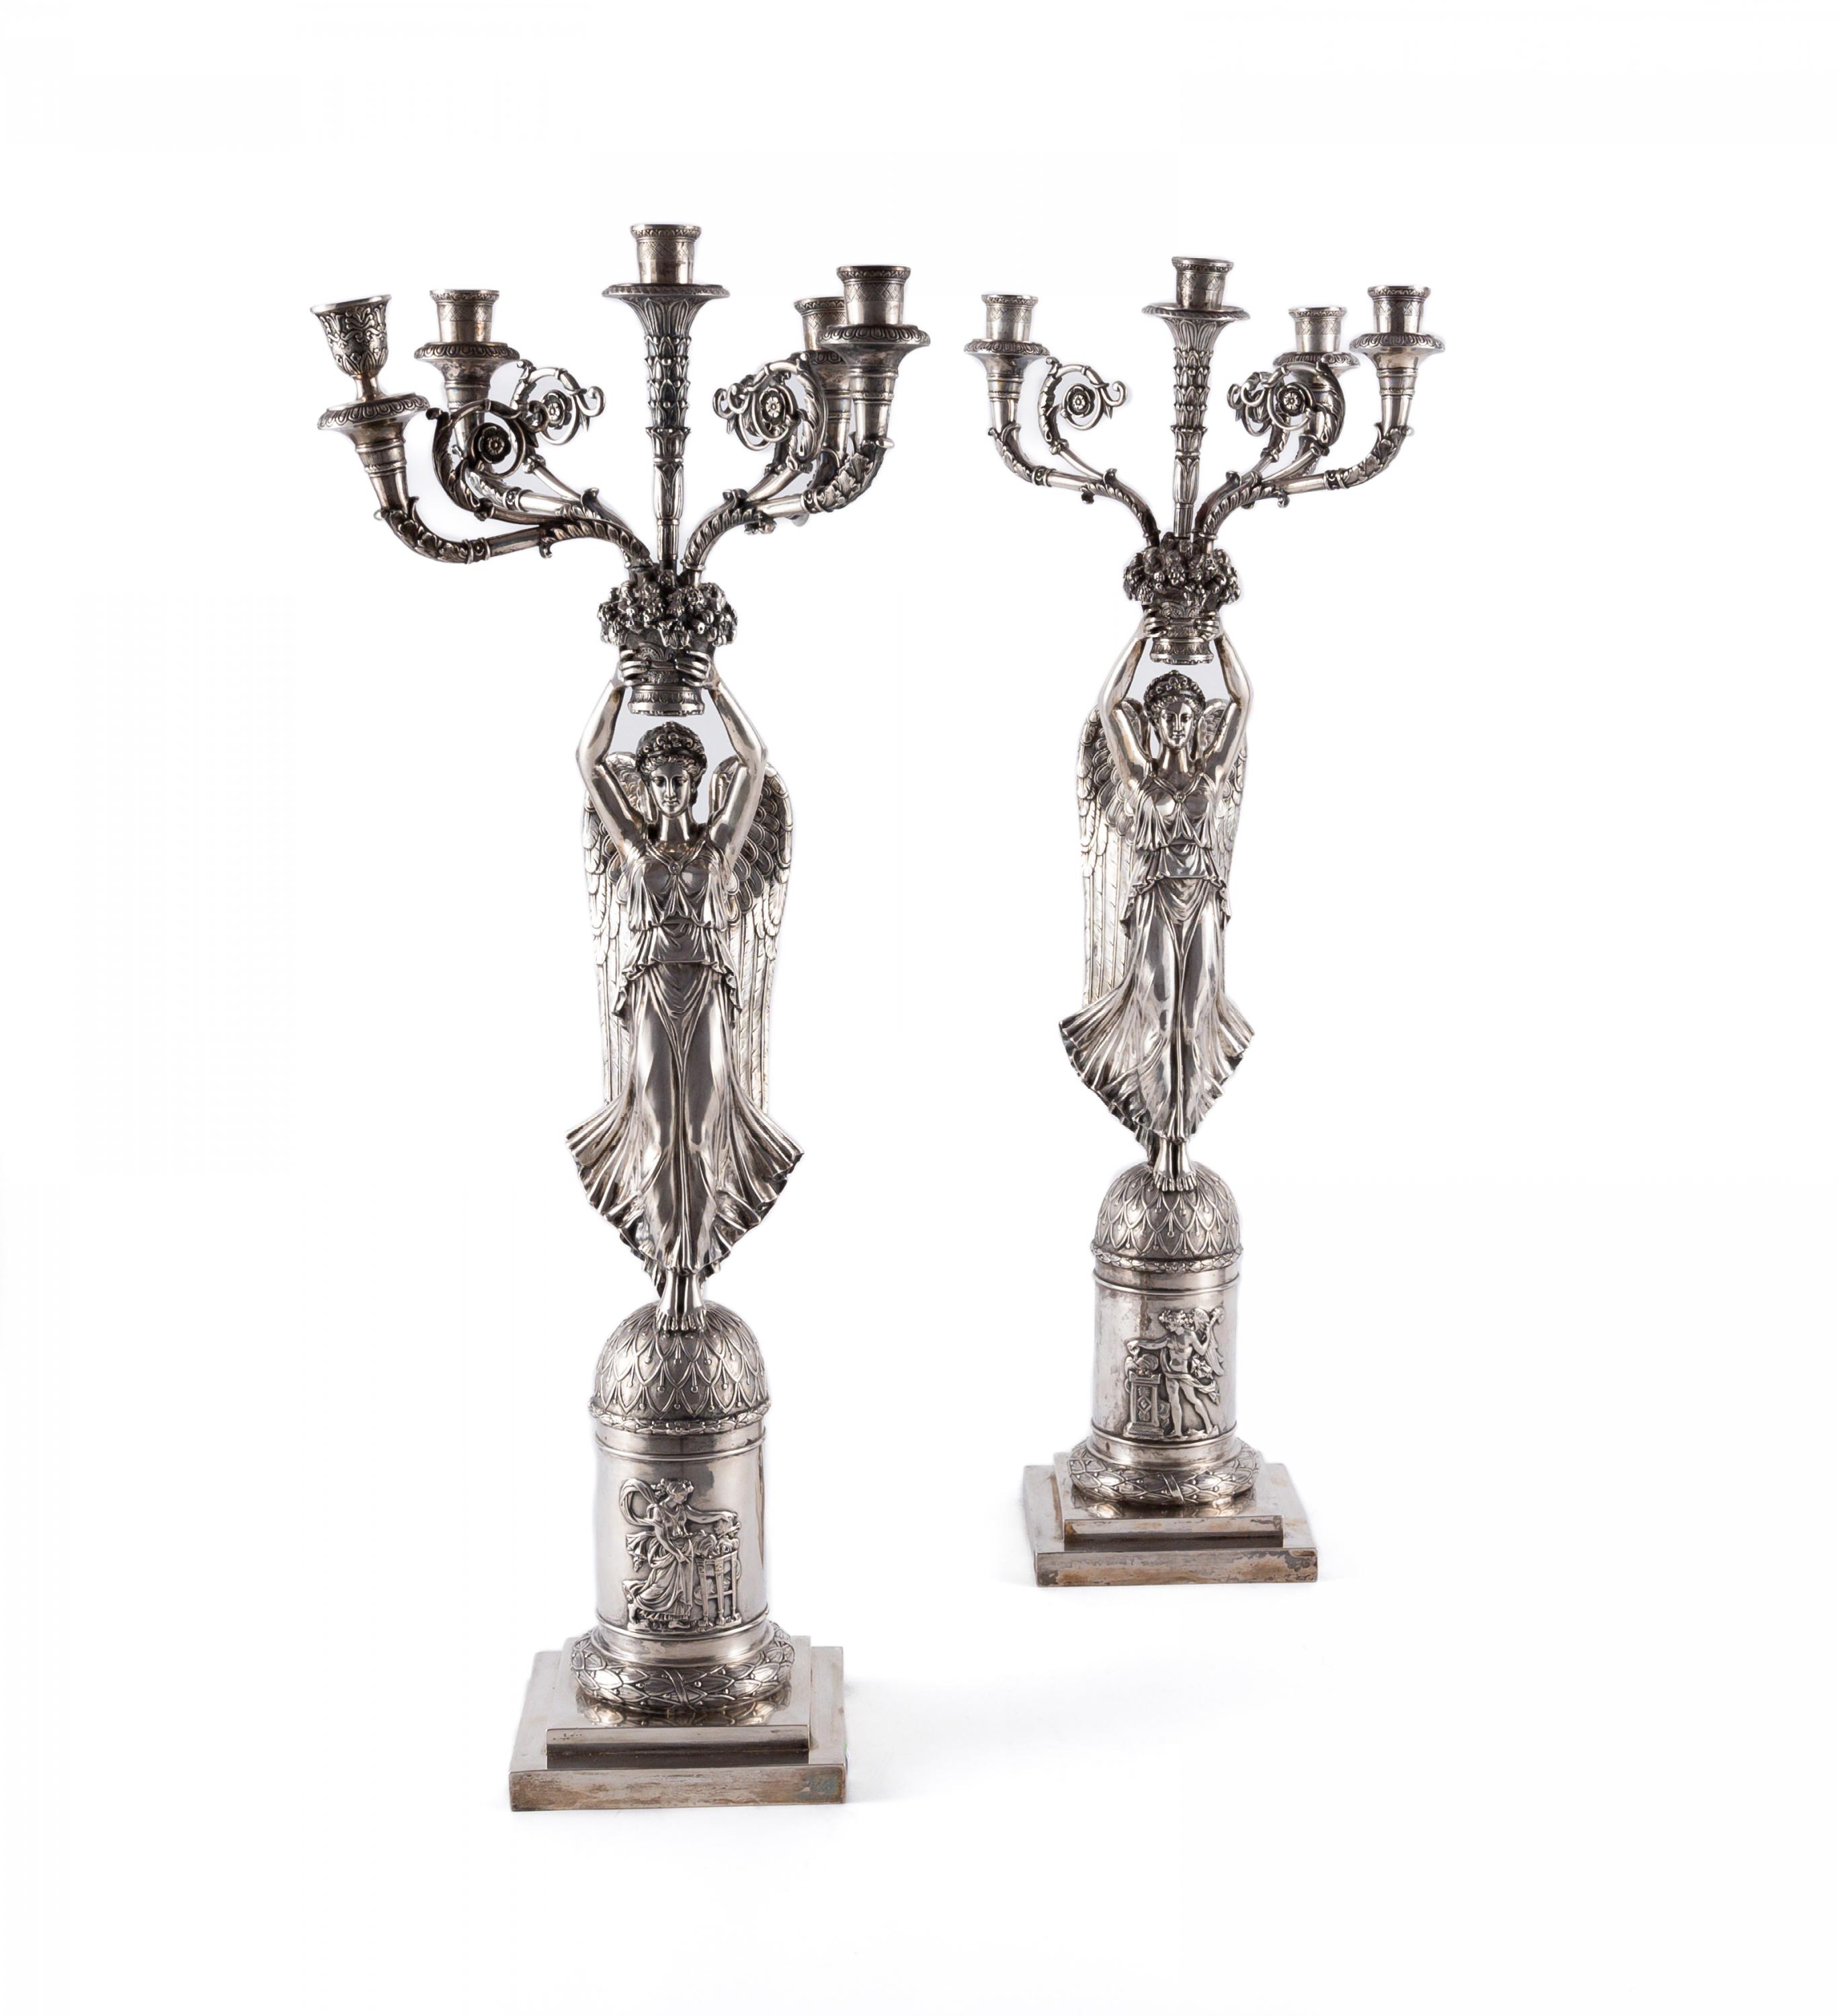 COUPLE OF EXCEPTIONAL SILVER GIRNANDOLES WITH VICTORIAN STYLE EMPIRE - Image 2 of 8